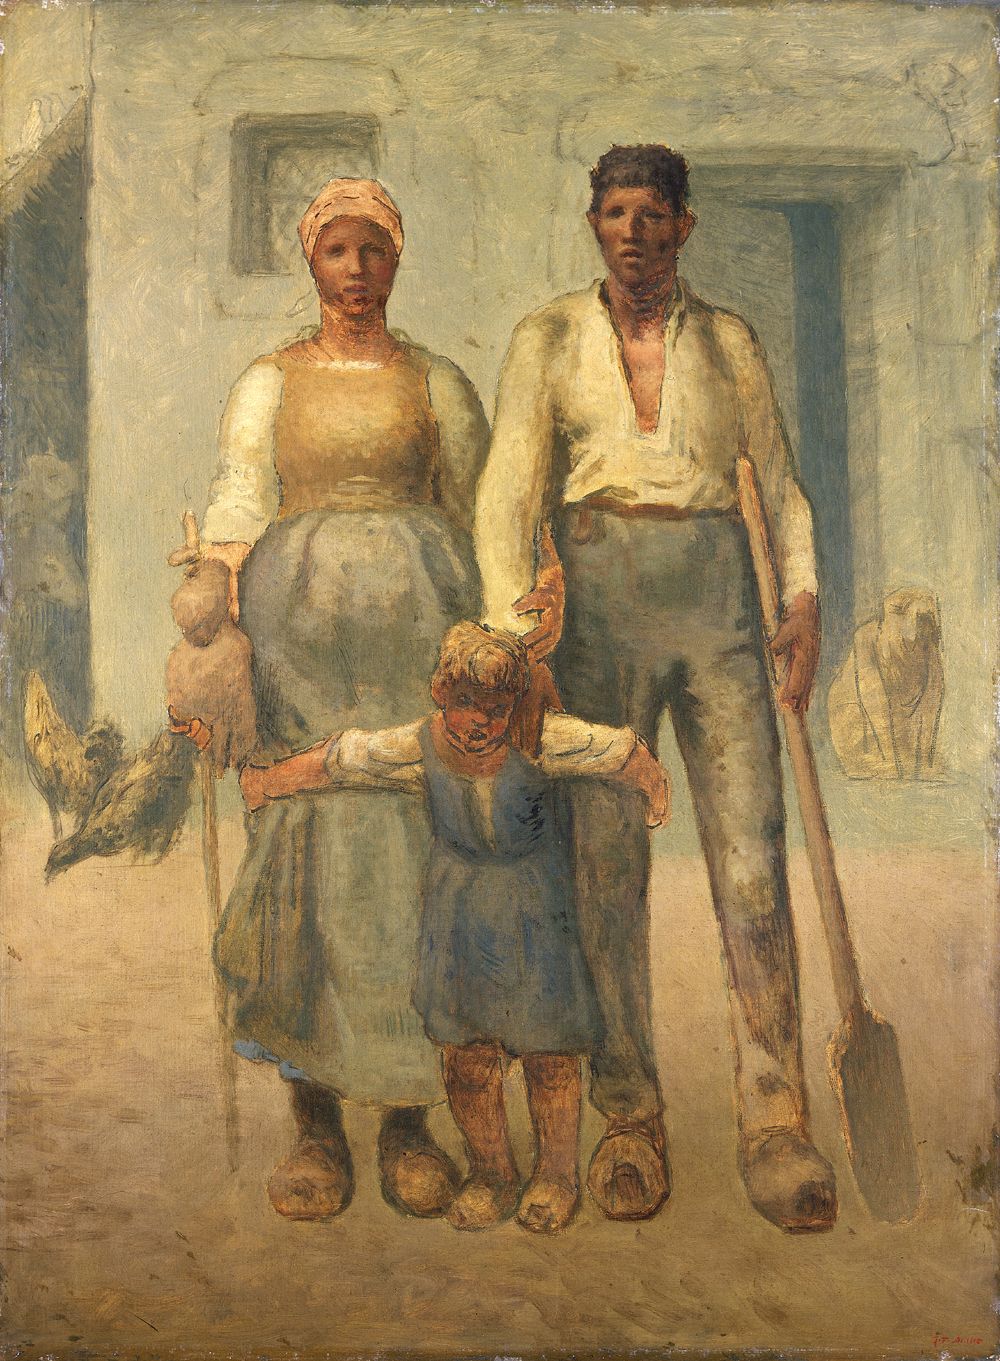 NMW A 2473, Jean-François Millet, The Peasant Family, 1871-72